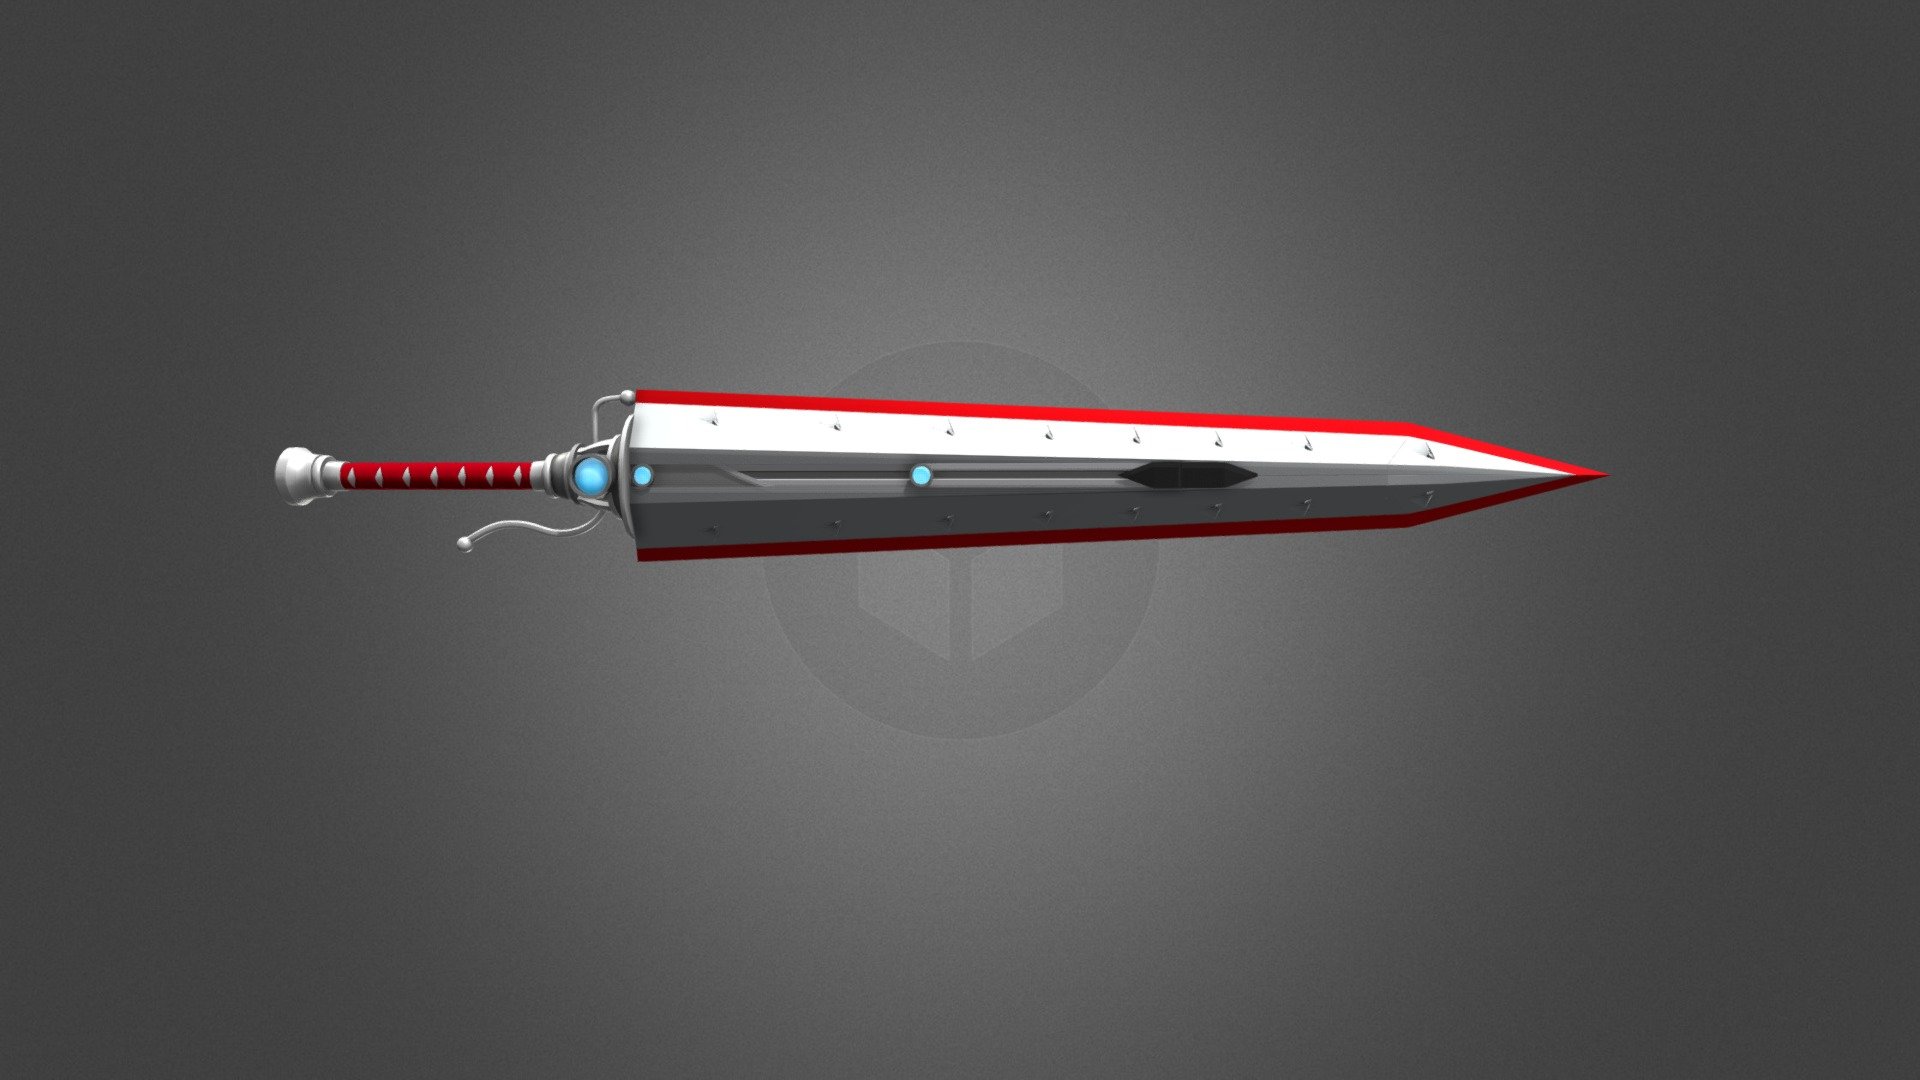 Peacemaker Rwby Oc Weapon Commission 3d Model By Denalcc1010 Denalcc1010 23fa01a Sketchfab